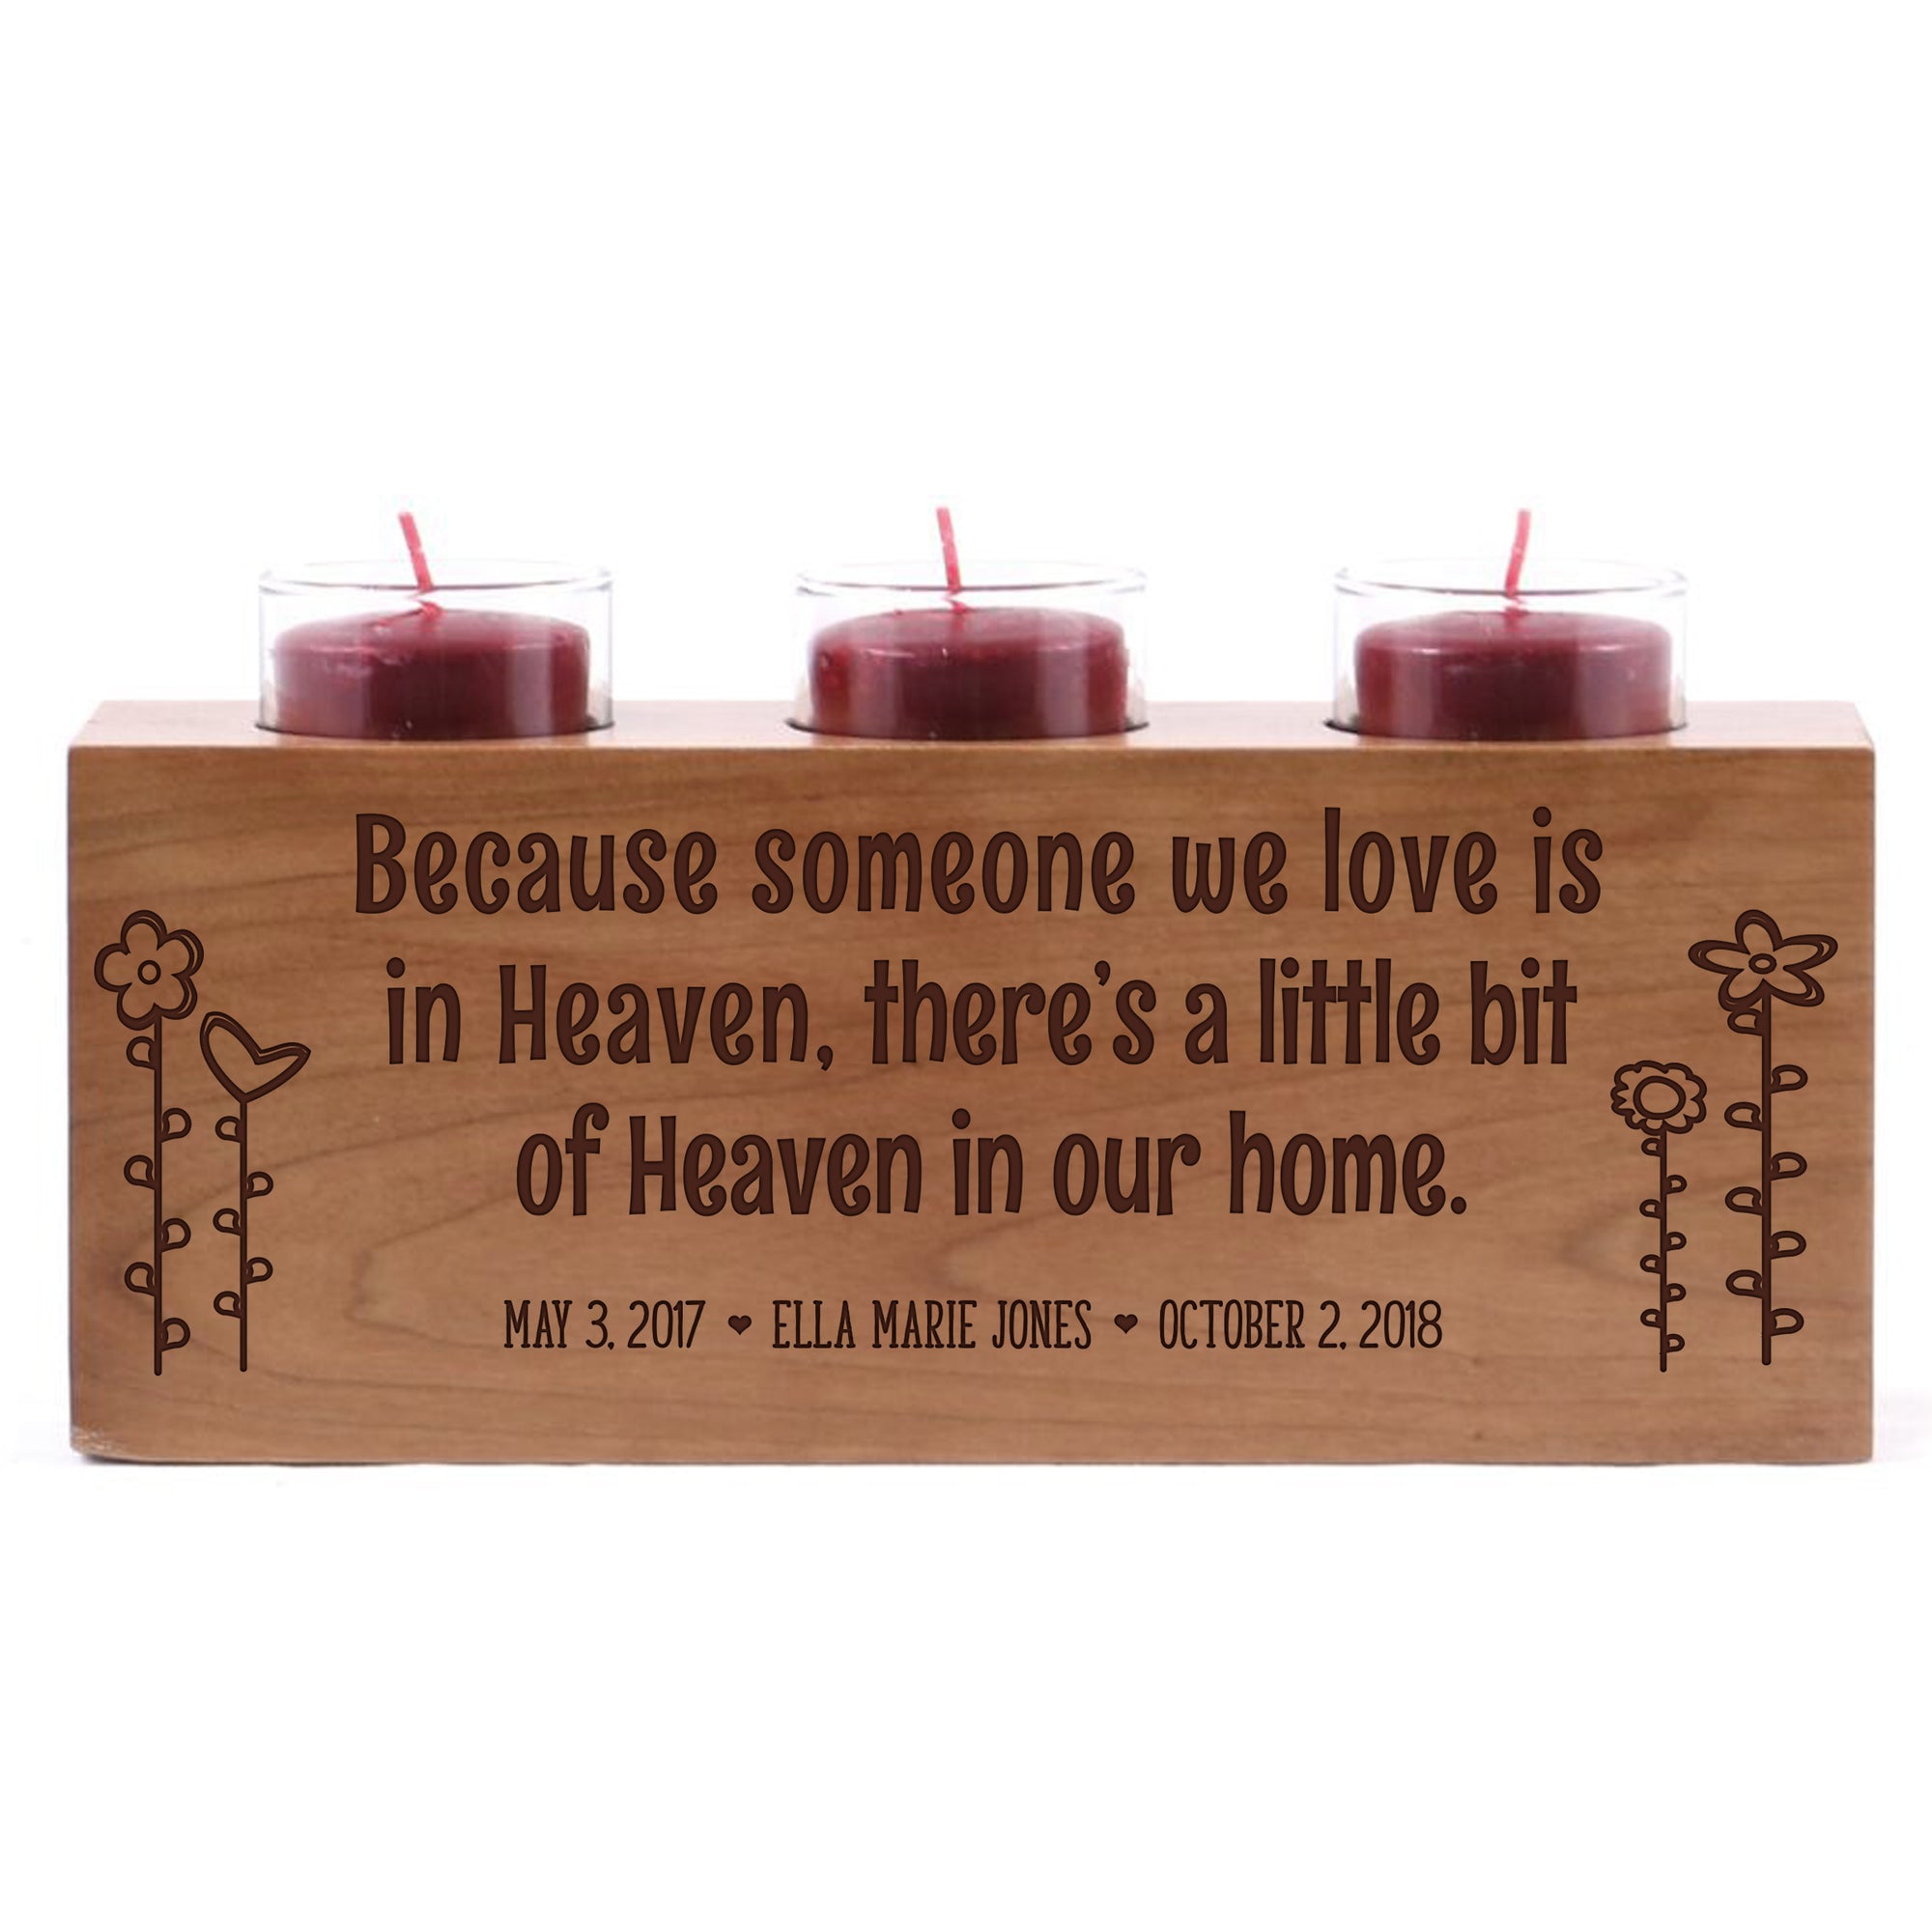 Personalized Baby Memorial sympathy candle holder custom engraved wood keepsake ideas for Loved One 10" L x 4" H by LifeSong Milestones